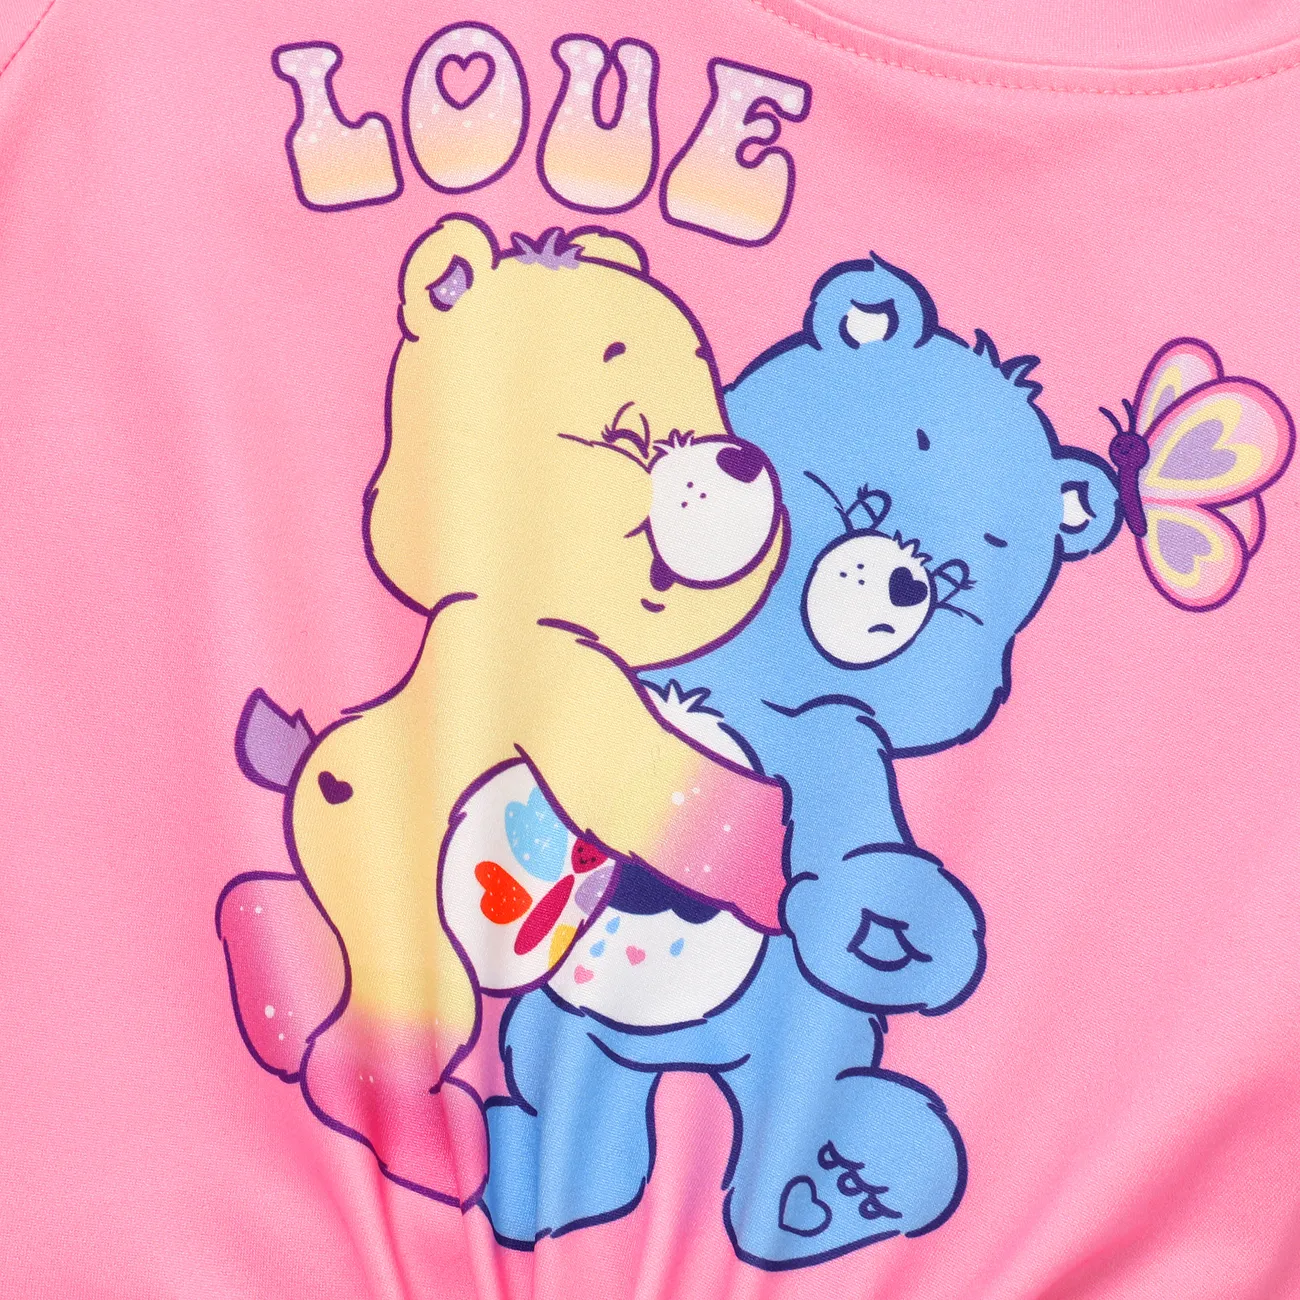 Care Bears Toddler Girls Mother's Day 2pcs Character Print Knotted Tee with Rainbow Flared Pants Set Pink big image 1